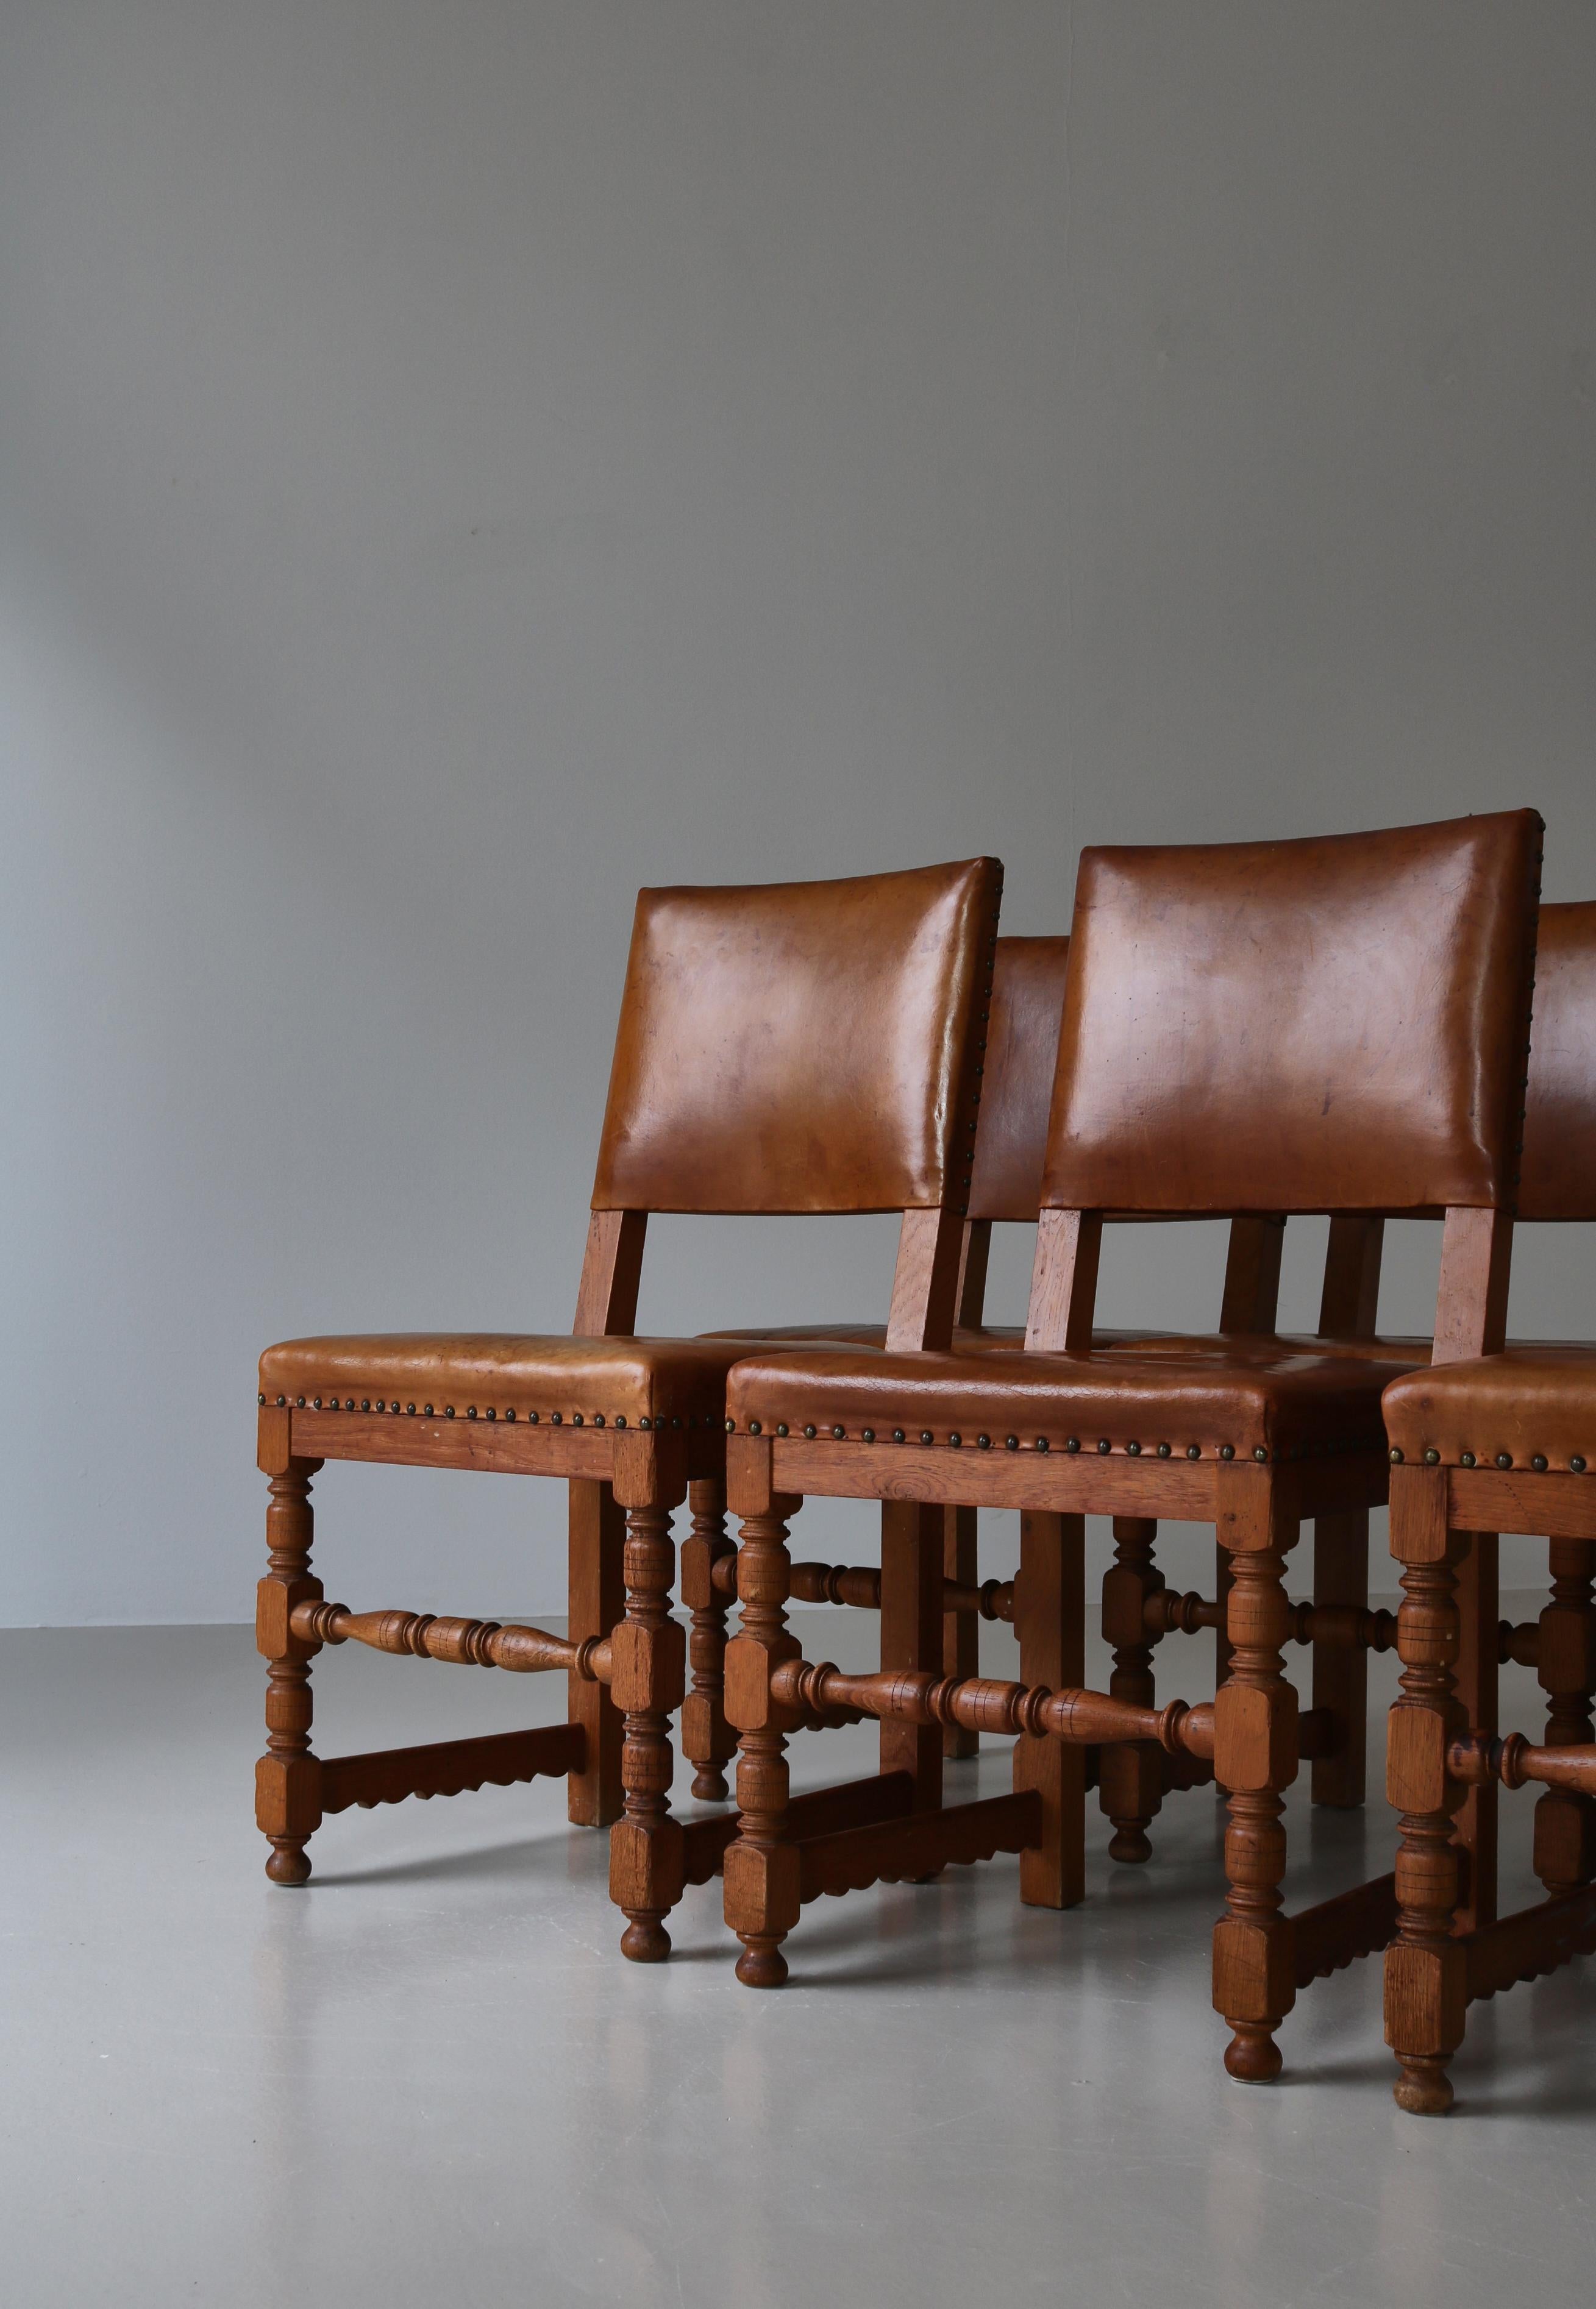 Master Cabinetmaker Lars Møller Dining Chairs in Oak & Leather, Denmark, 1935 In Good Condition For Sale In Odense, DK